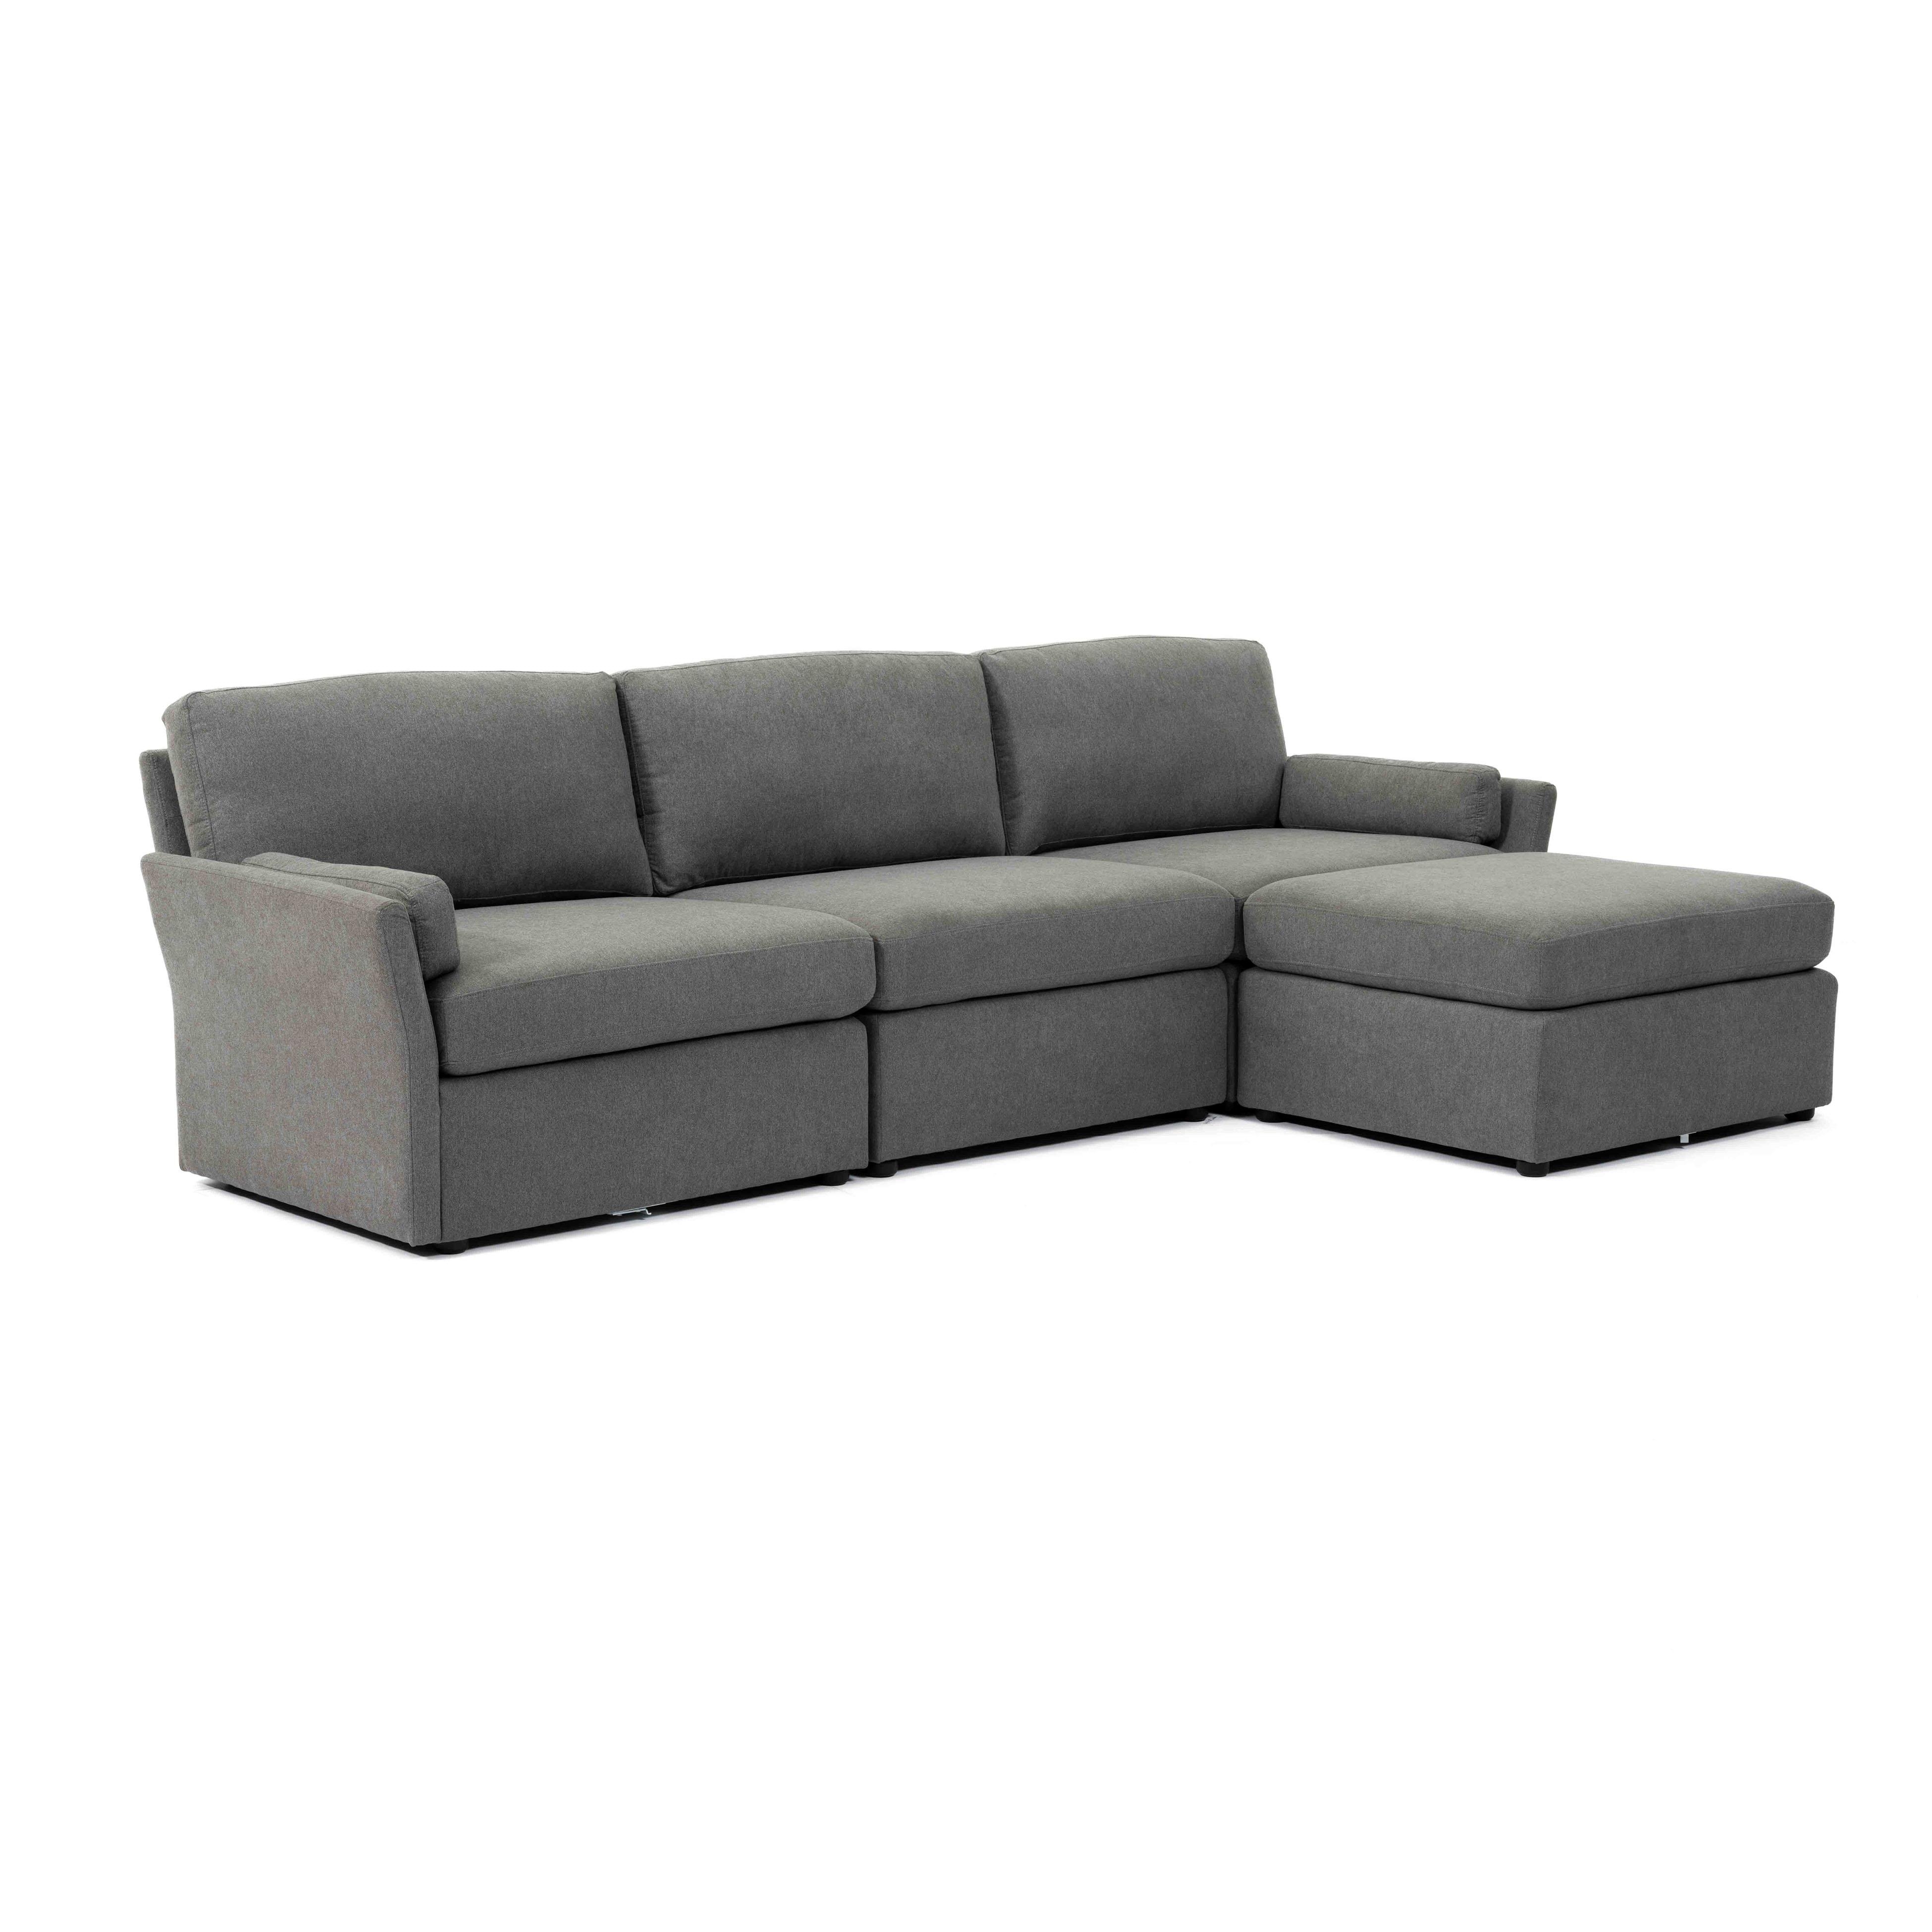 Catarina Gray Chaise Sectional - Image 1